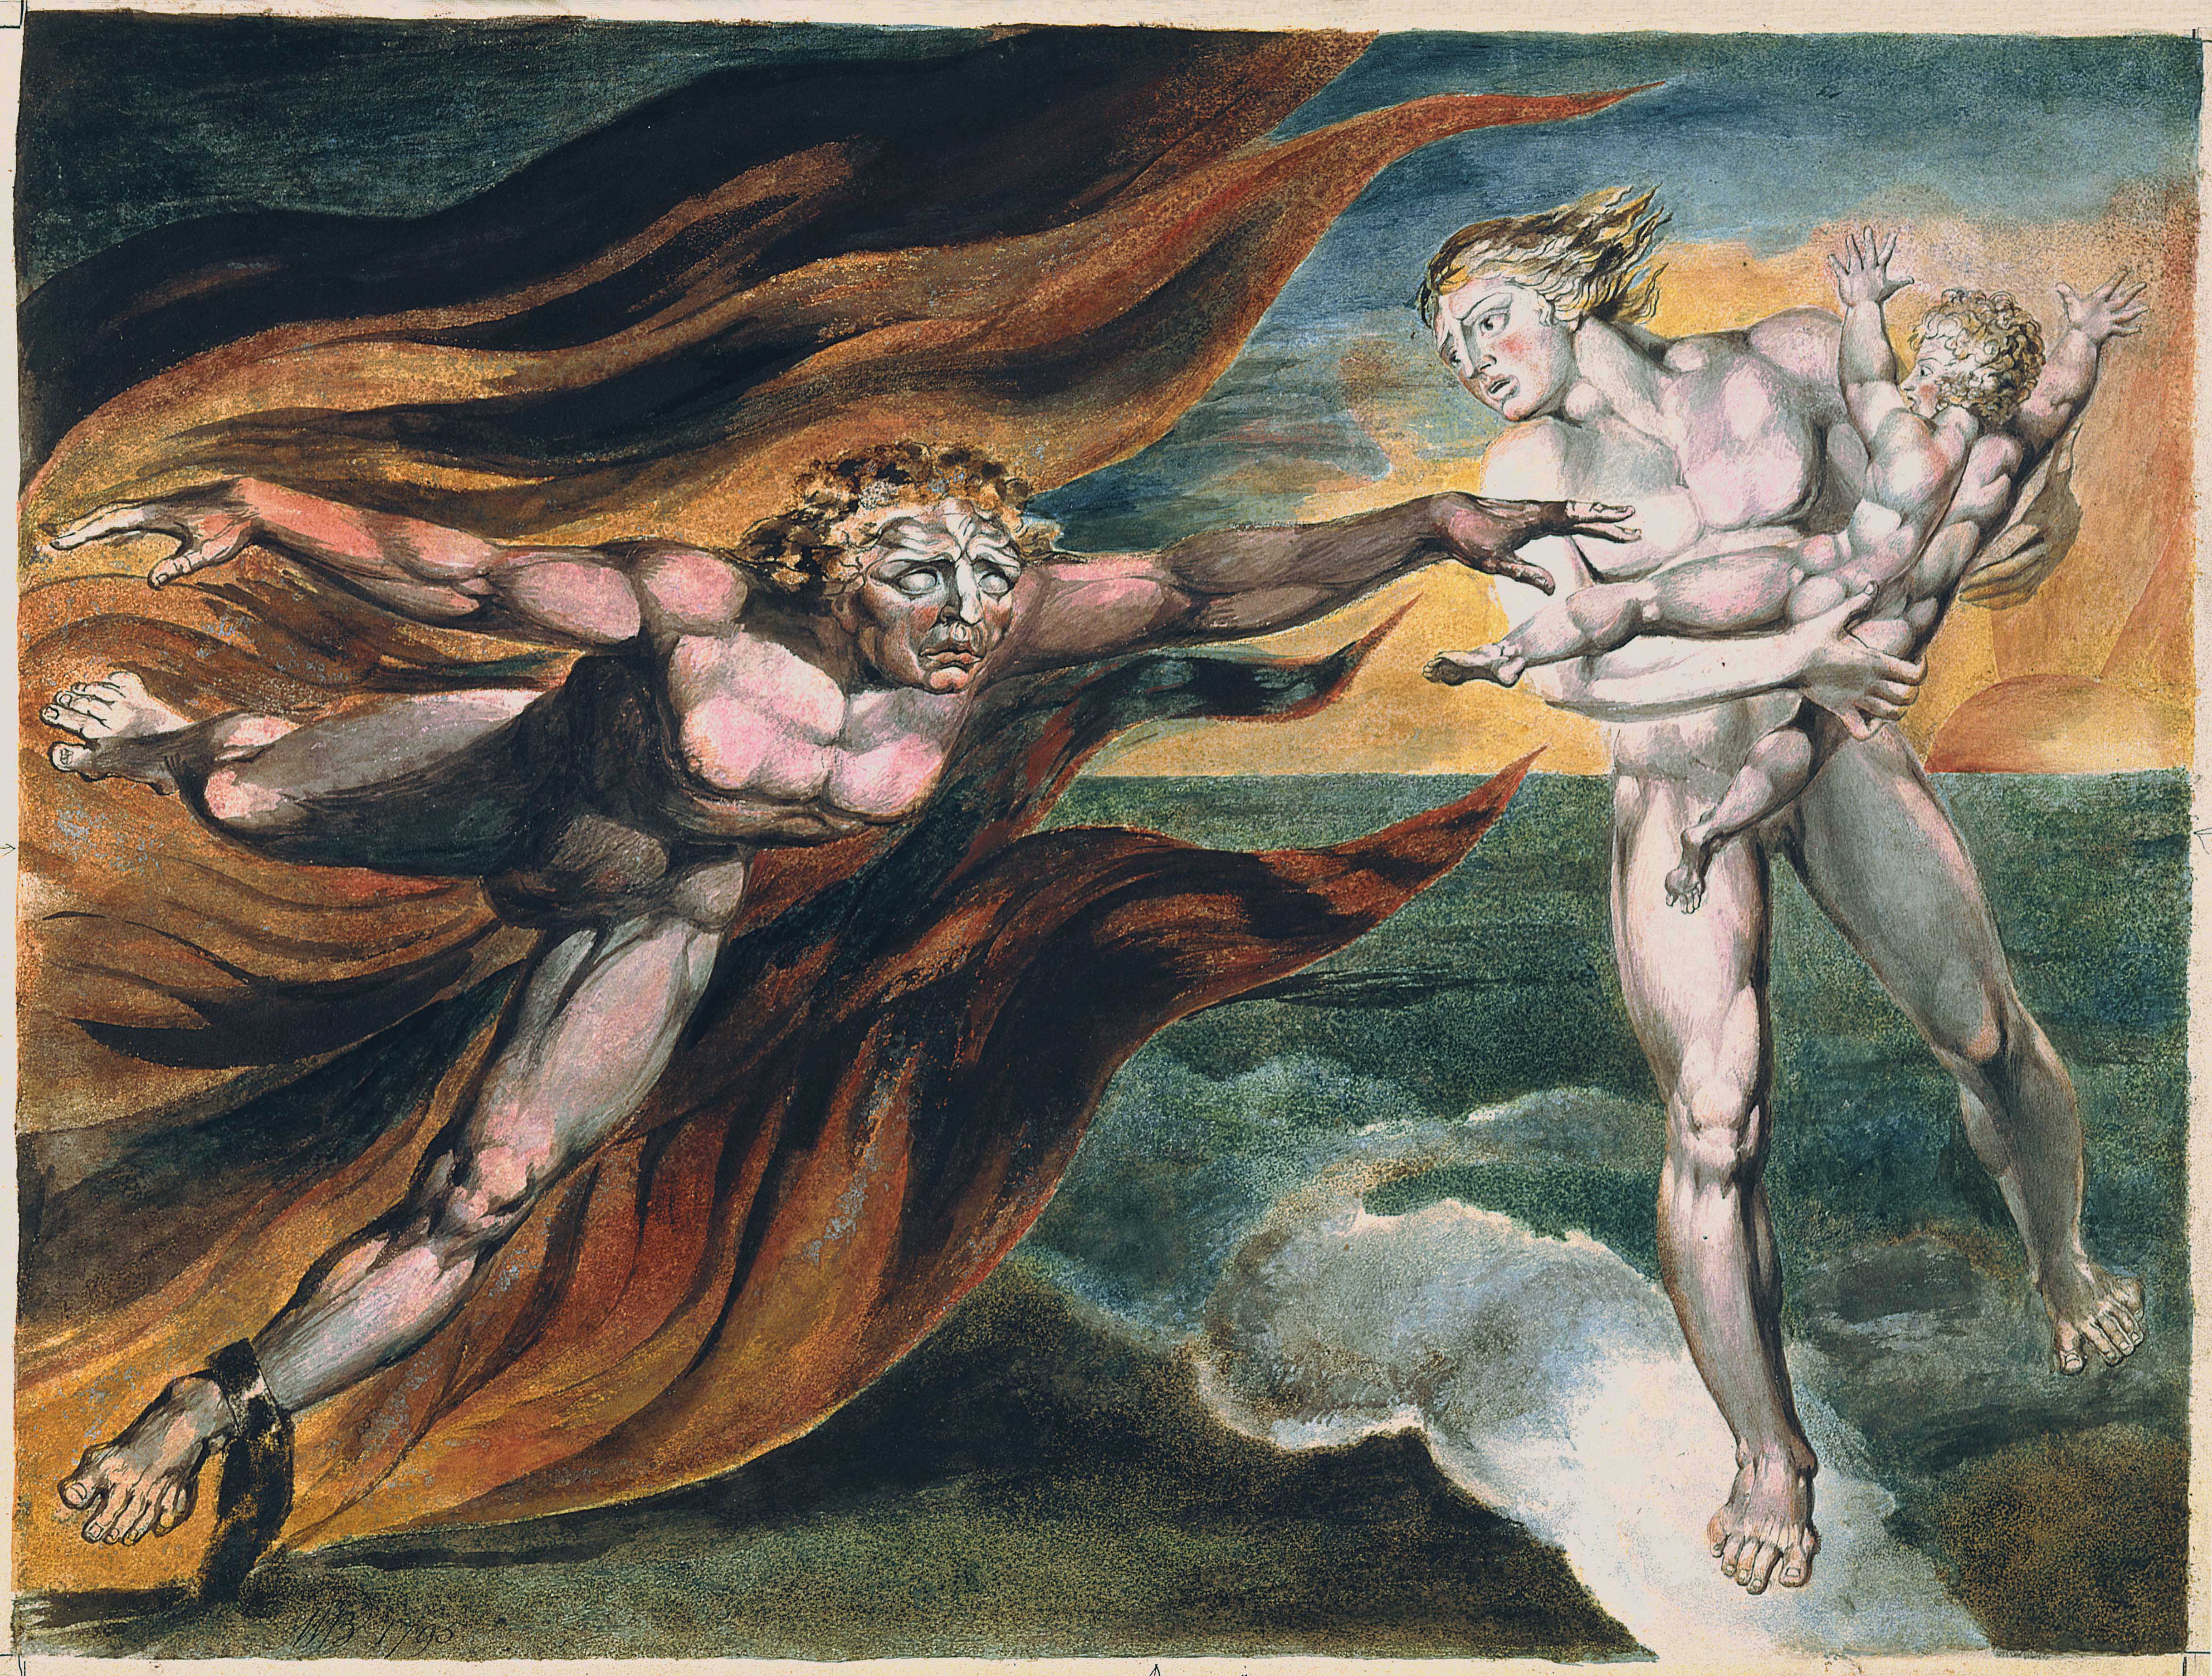 Good and Evil Angels. Plate 4 of The Marriage of Heaven and Hell. From The William Blake Archive: http://www.blakearchive.org